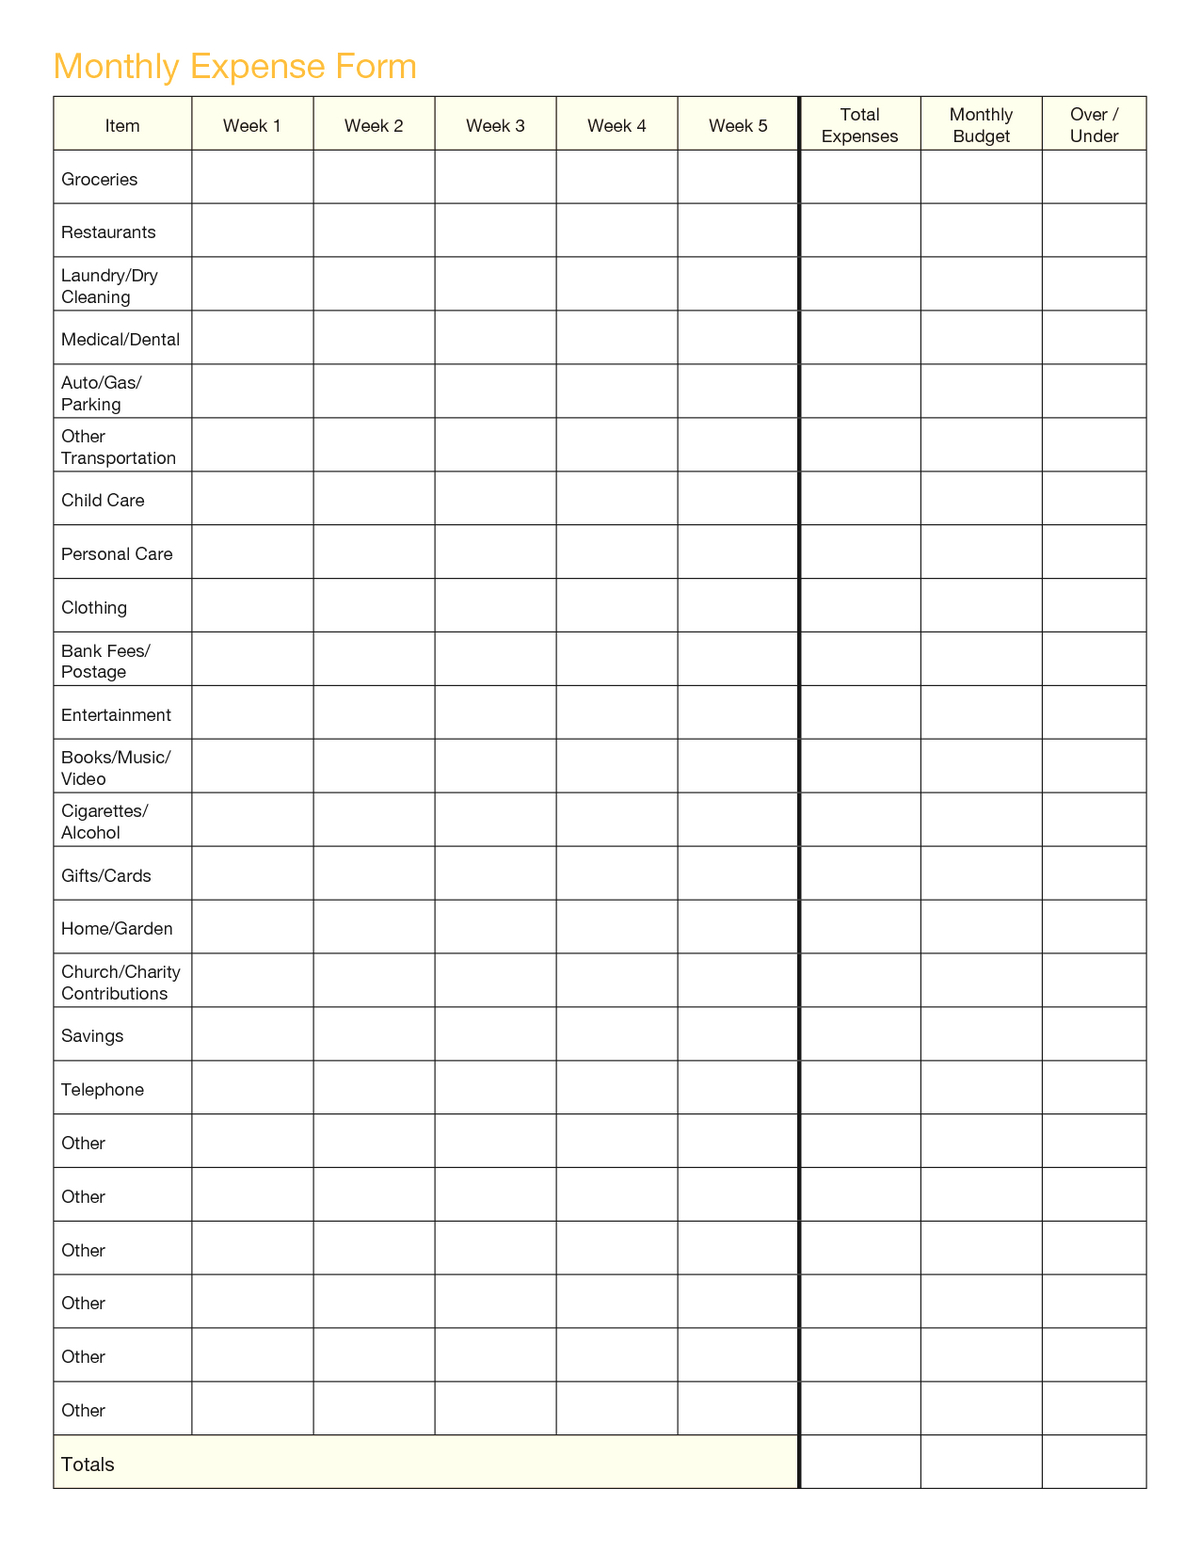 Rental Property Business Spreadsheet Intended For Free Business Budget Spreadsheet Home Expense With Template Rental